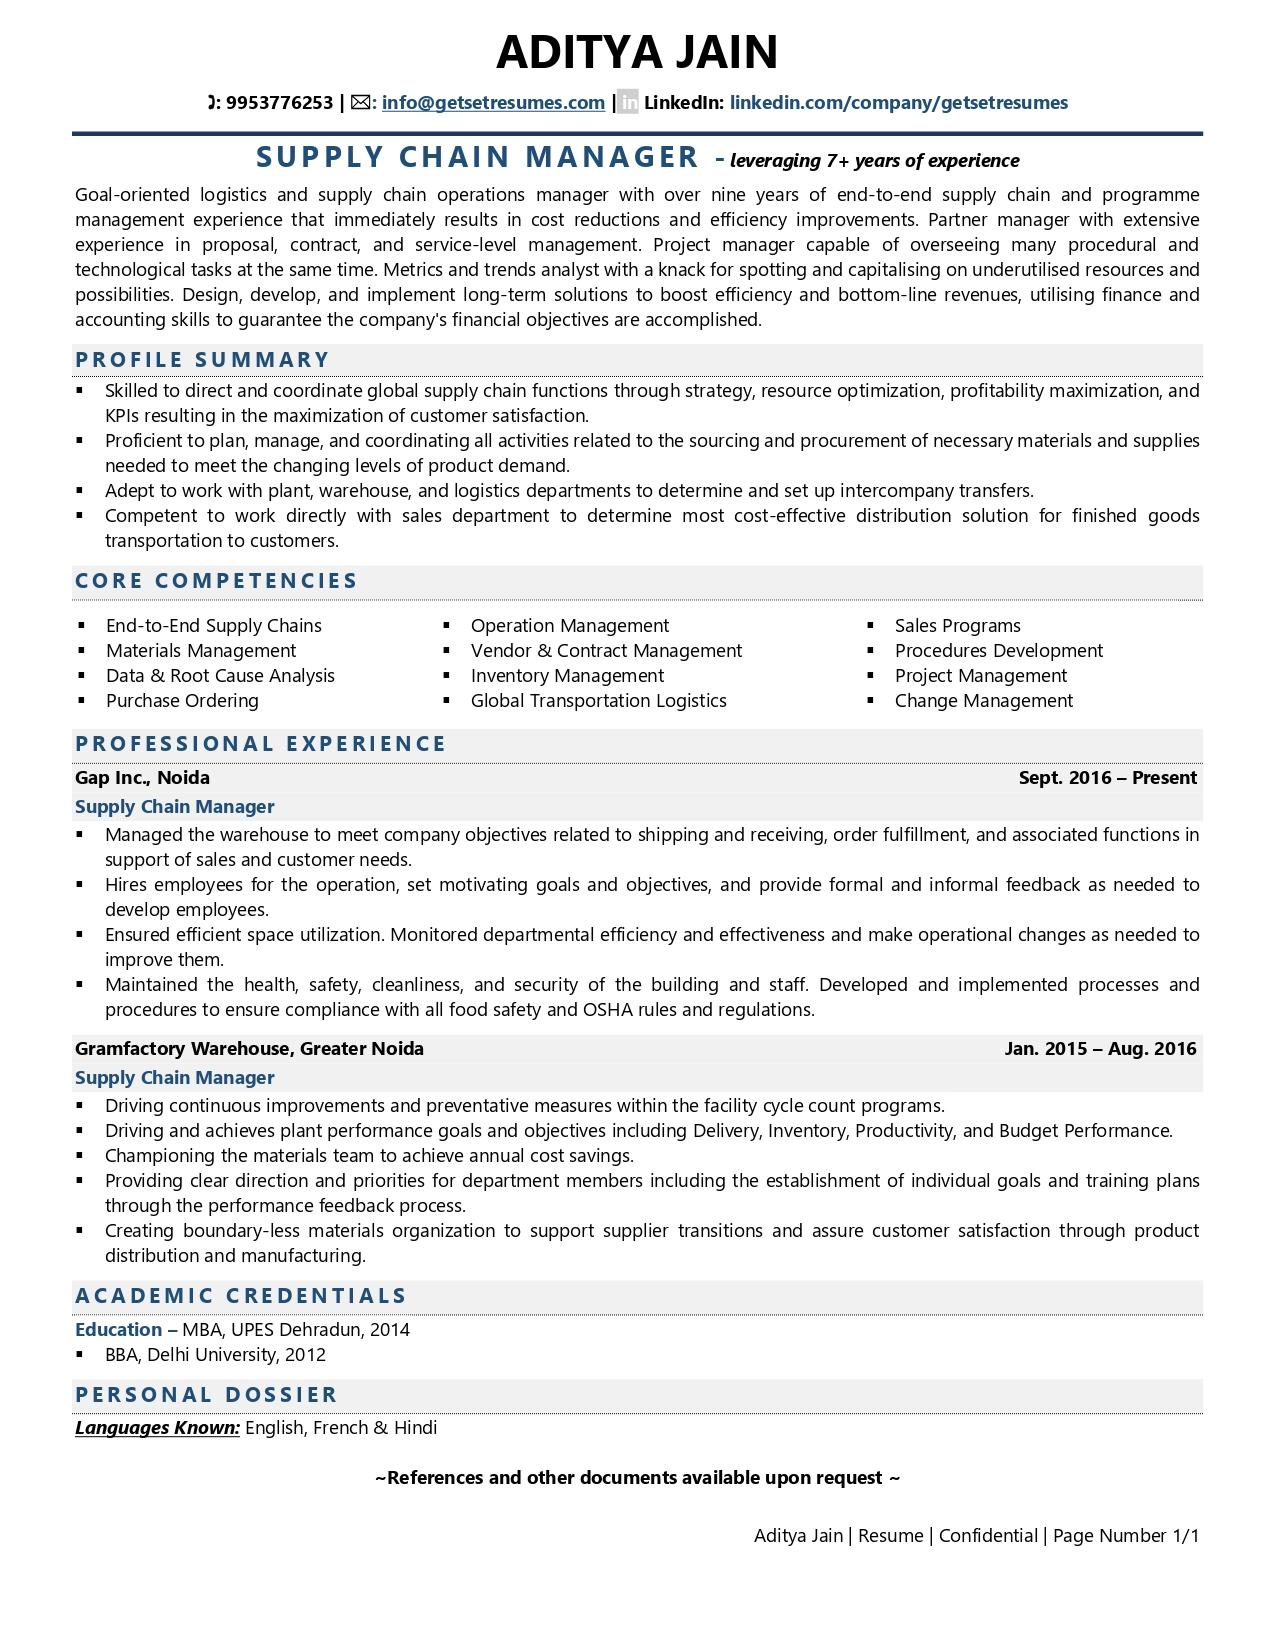 Supply Chain Manager - Resume Example & Template